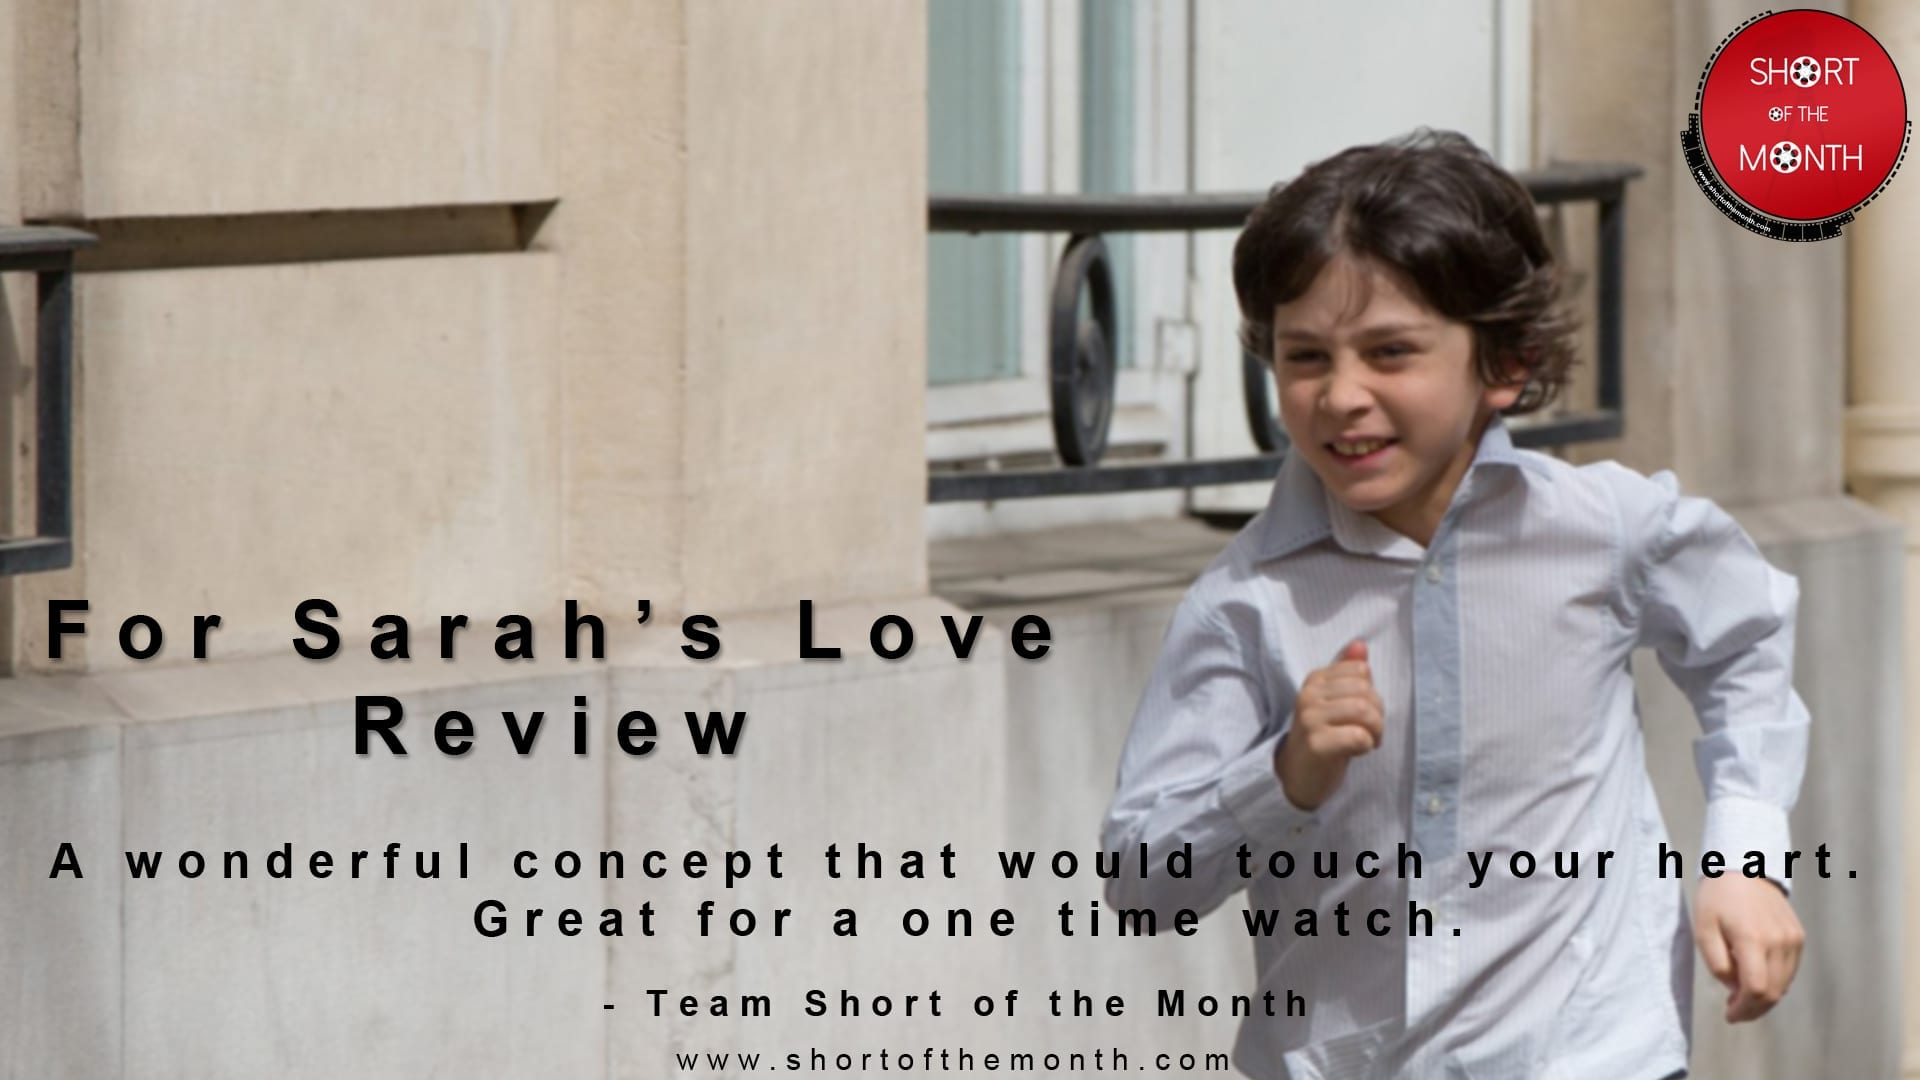 For Sarah's Love - Short Film Review - Short of the Month